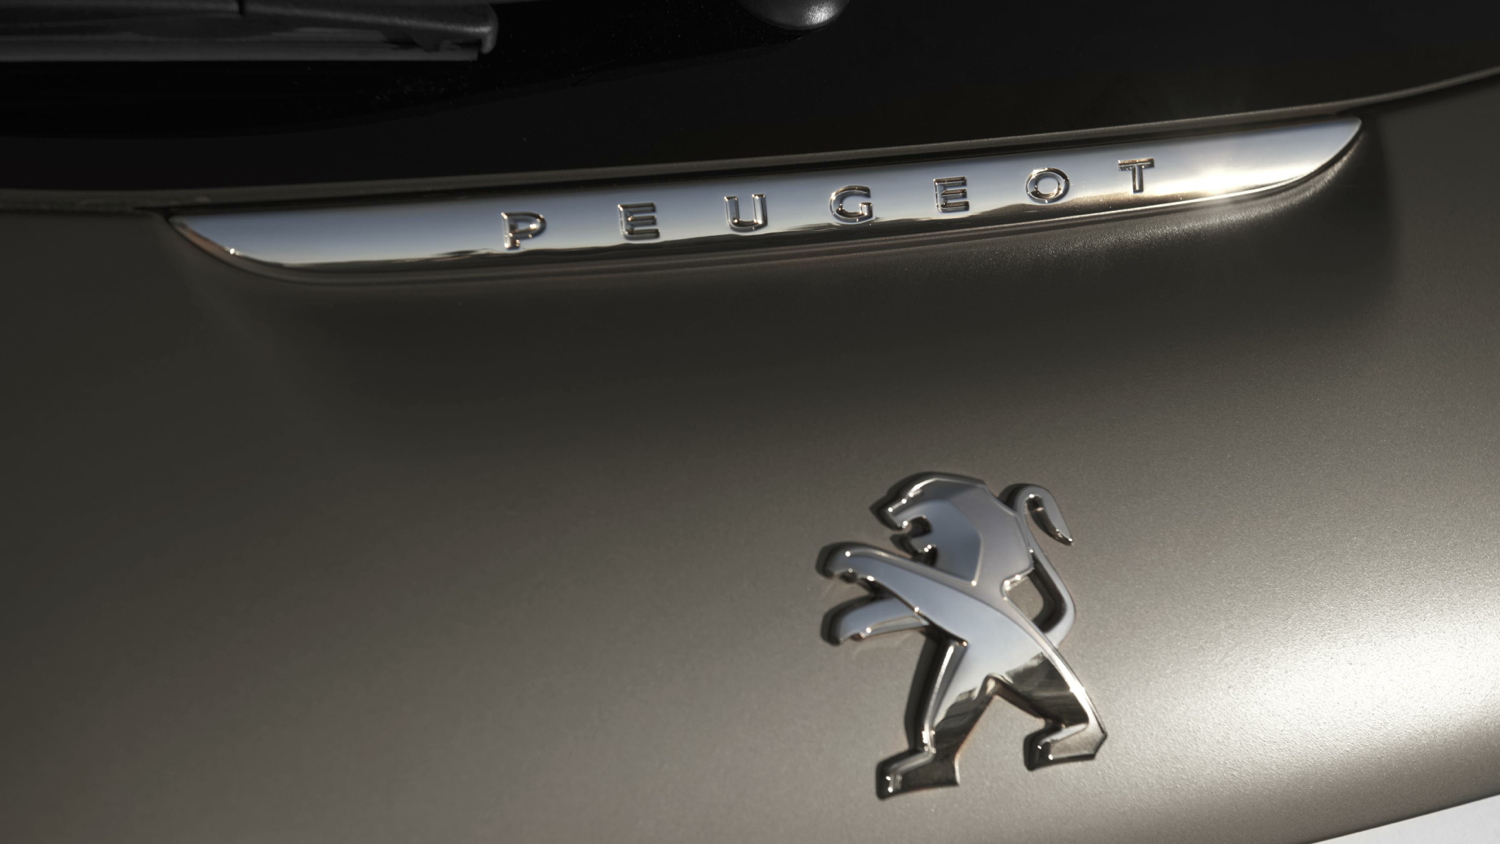 2015 Peugeot 208 with textured paint finish